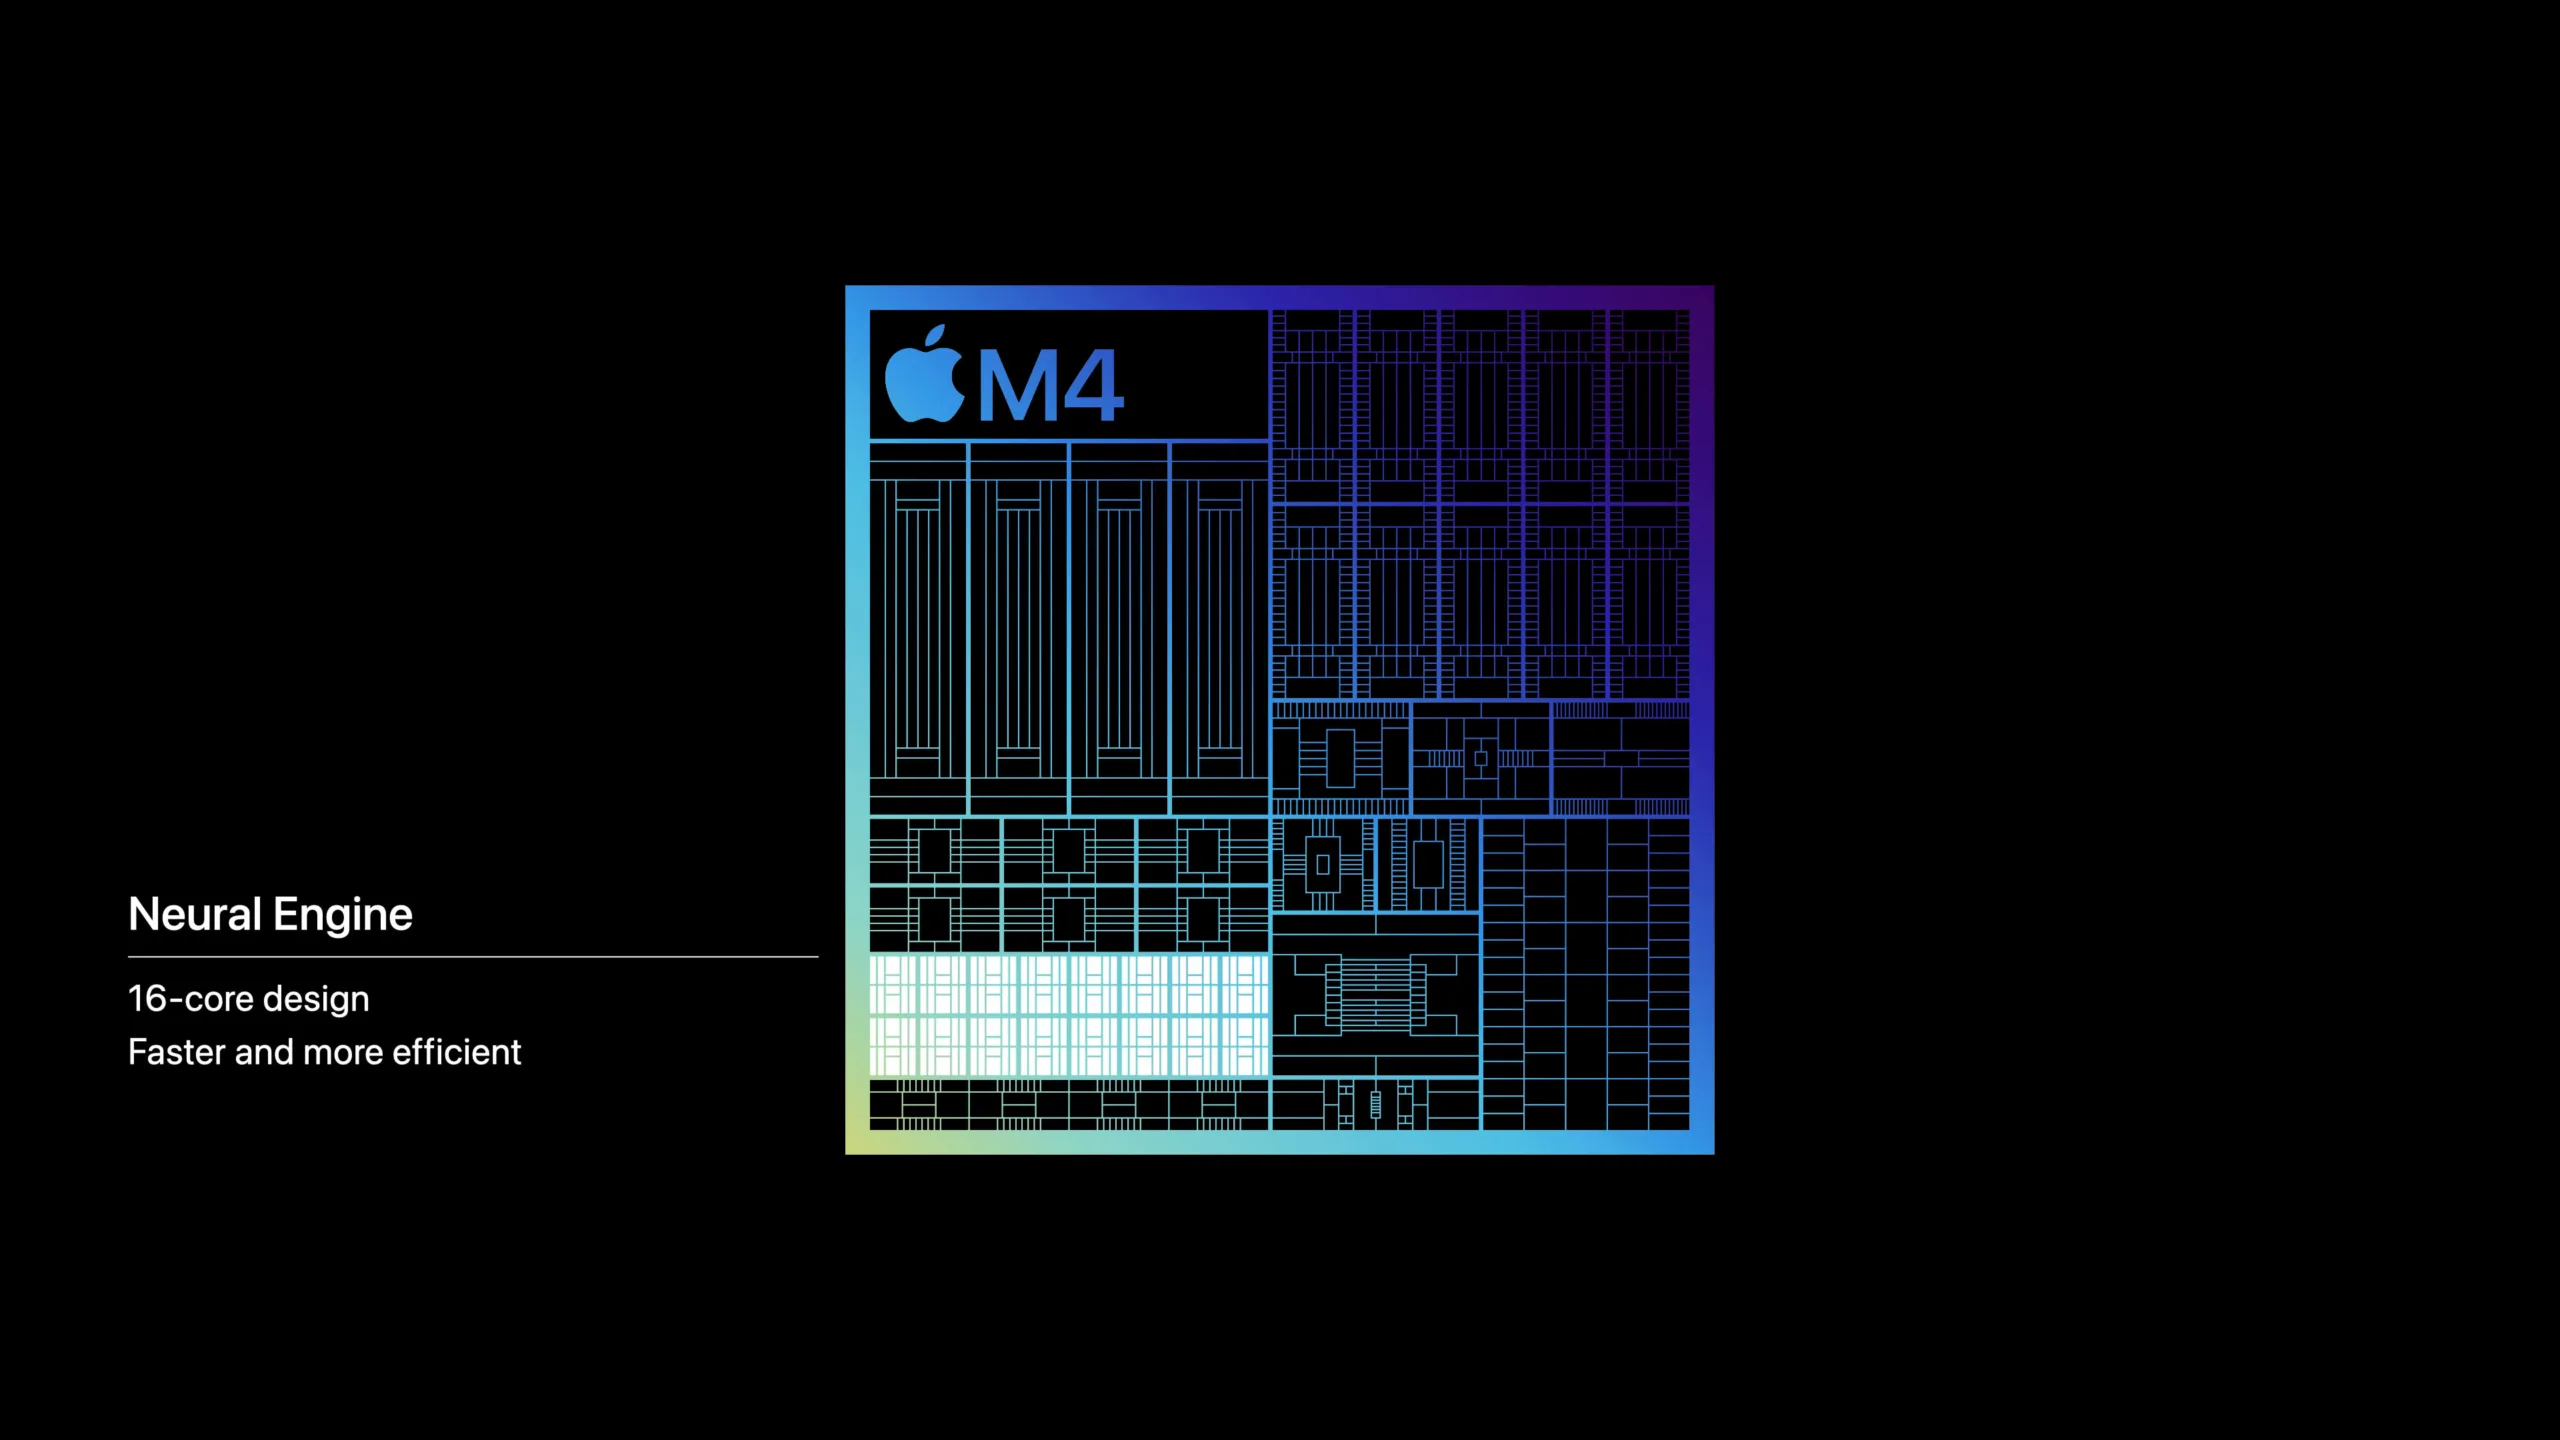 M4 includes Apple’s most powerful Neural Engine ever, capable of 38 trillion operations per second — 60x faster than the first Neural Engine in A11 Bionic.